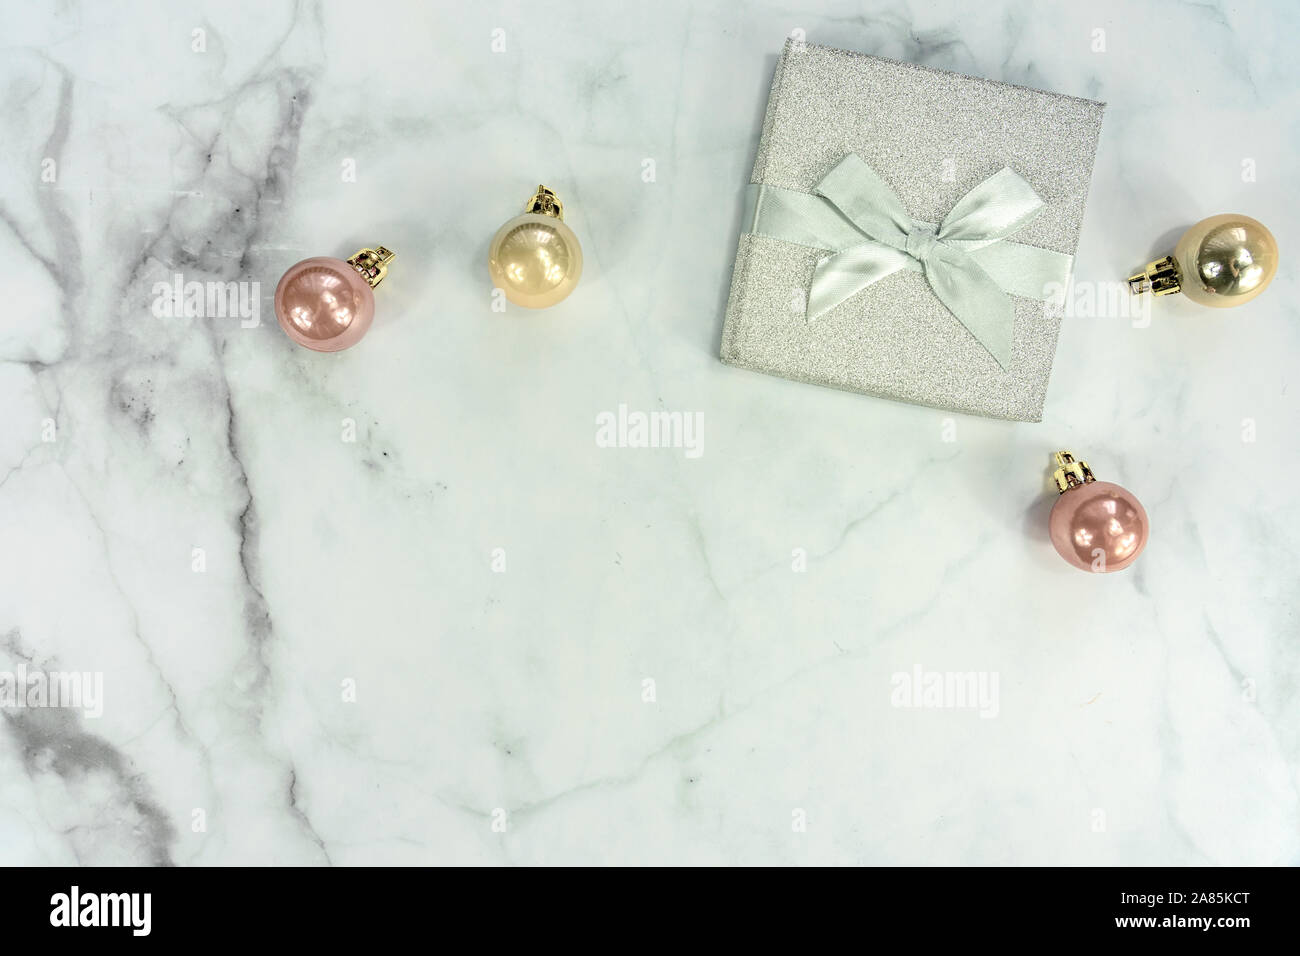 Christmas frame background on marble with silver decoration ornaments and gift box Stock Photo